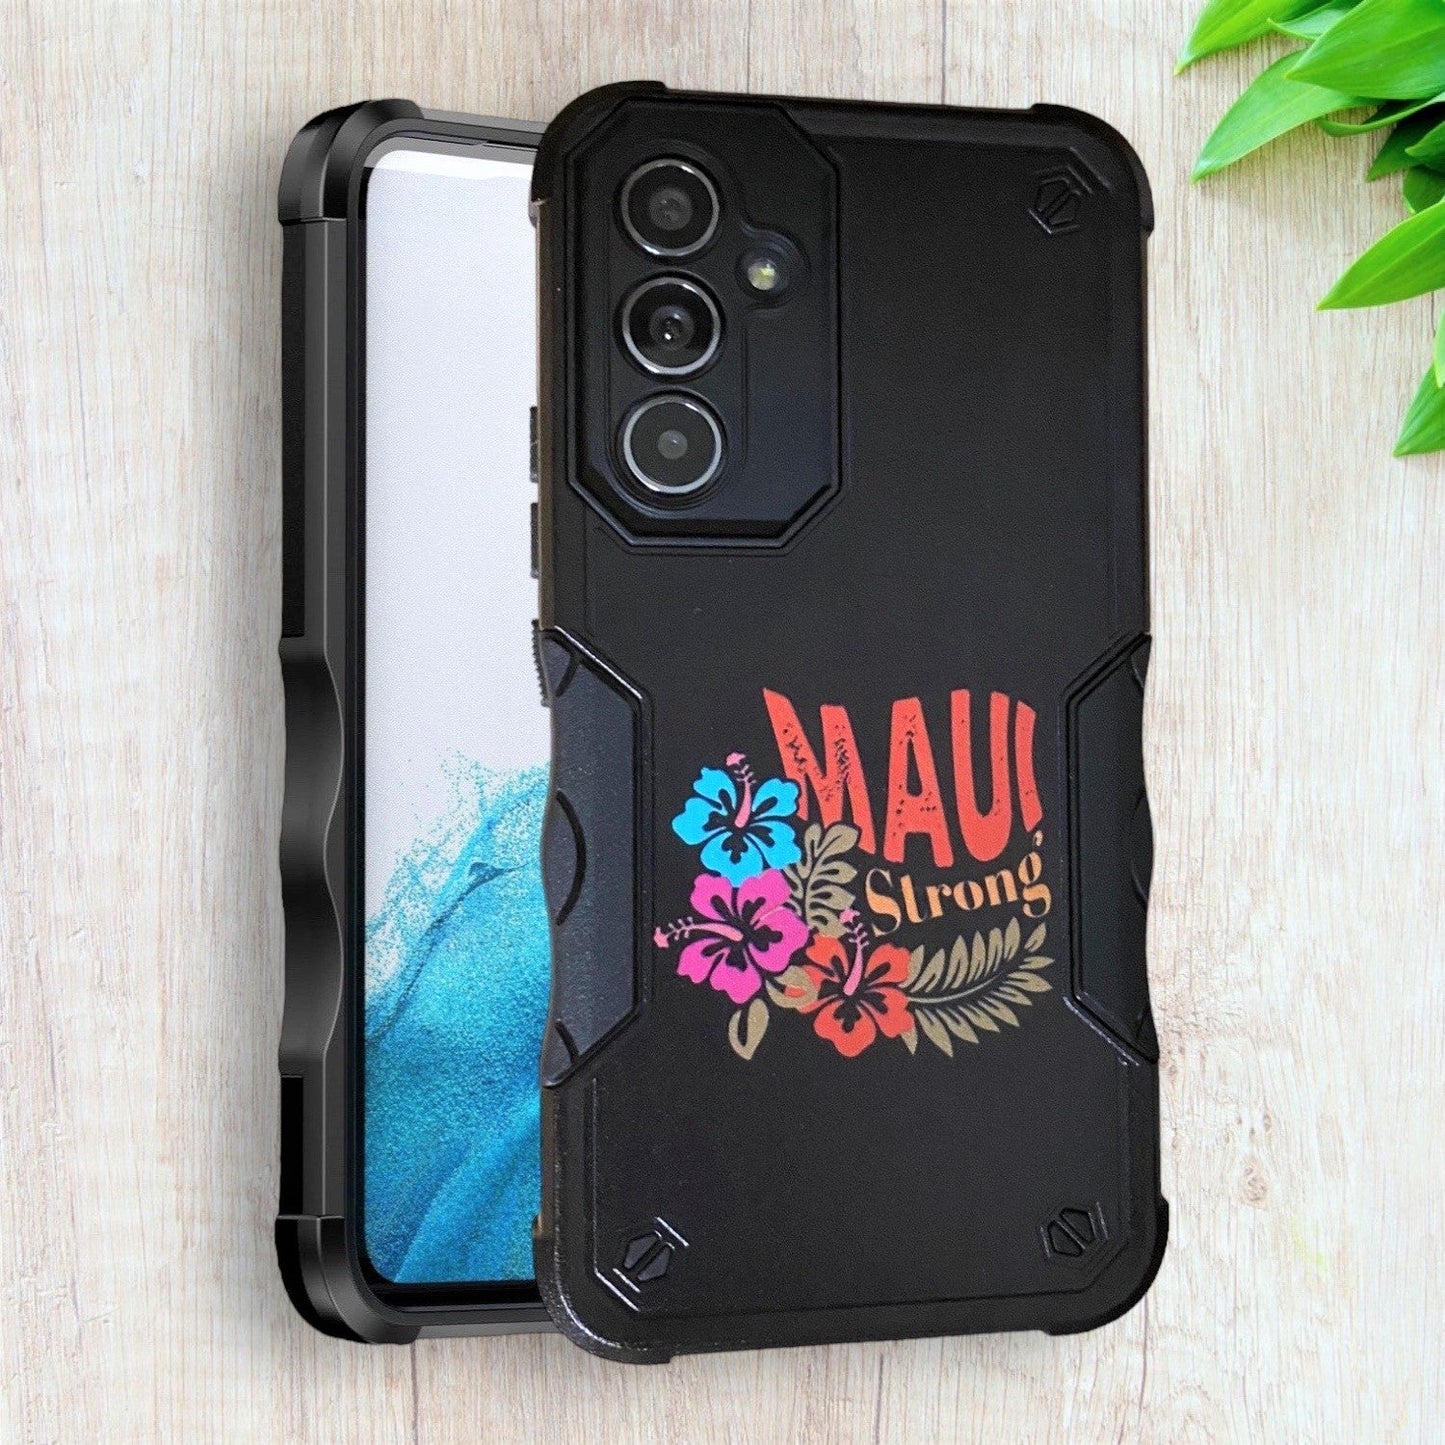 For Samsung - Maui Strong Phone Case, All Profits will be Donated, Support for Hawaii Fire Victims, Maui Wildfire Relief, Hawaii Fires, Lahaina Fires (Design & Print in the USA)